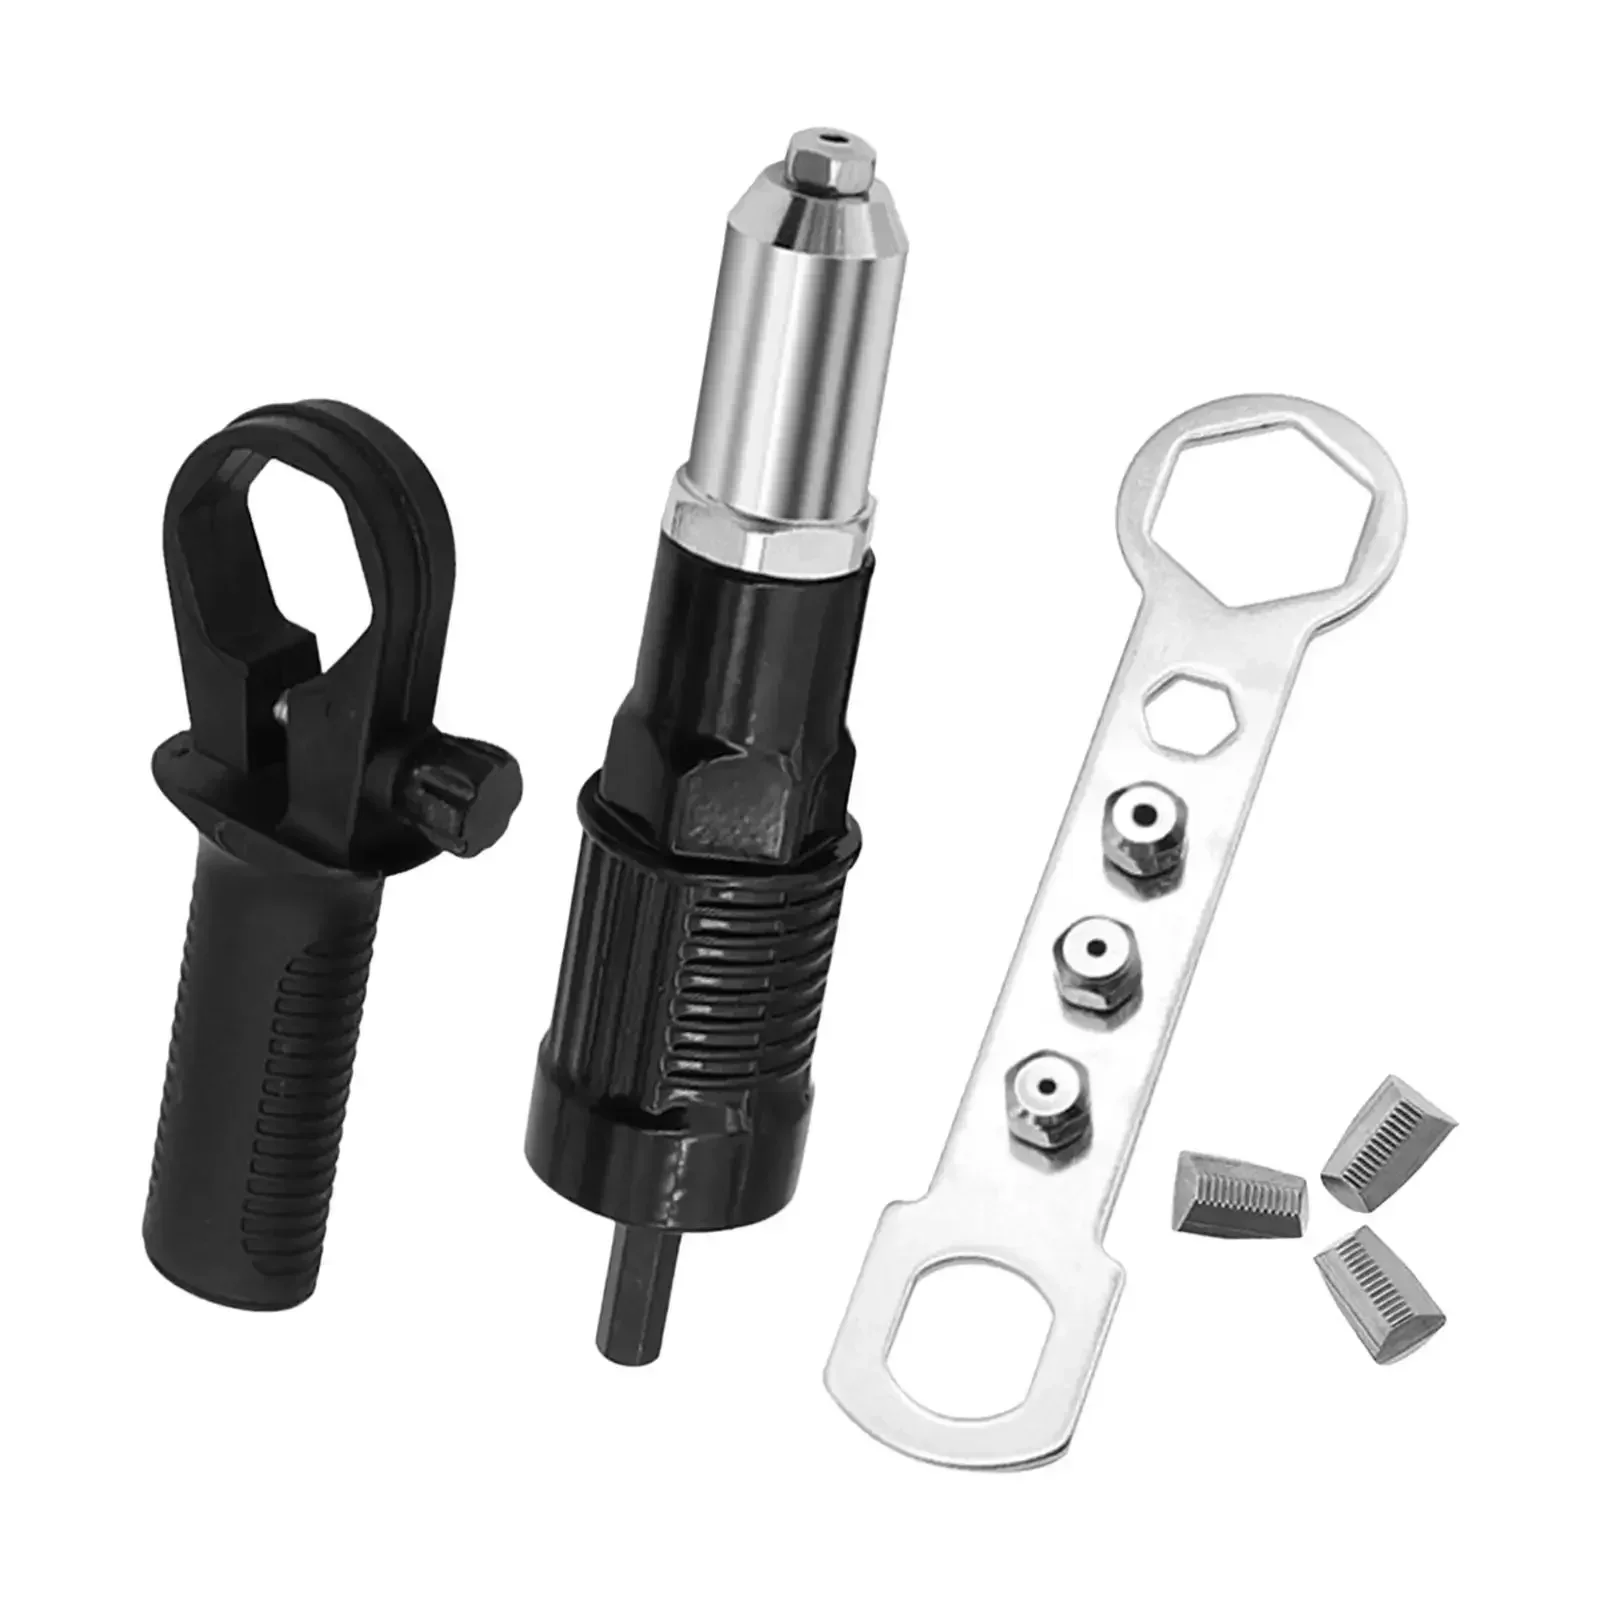 riveting-joint-cordless-drill-machine-rivet-pulling-rivet-riveting-joint-pulling-electric-adapter-riveting-adapter-joint